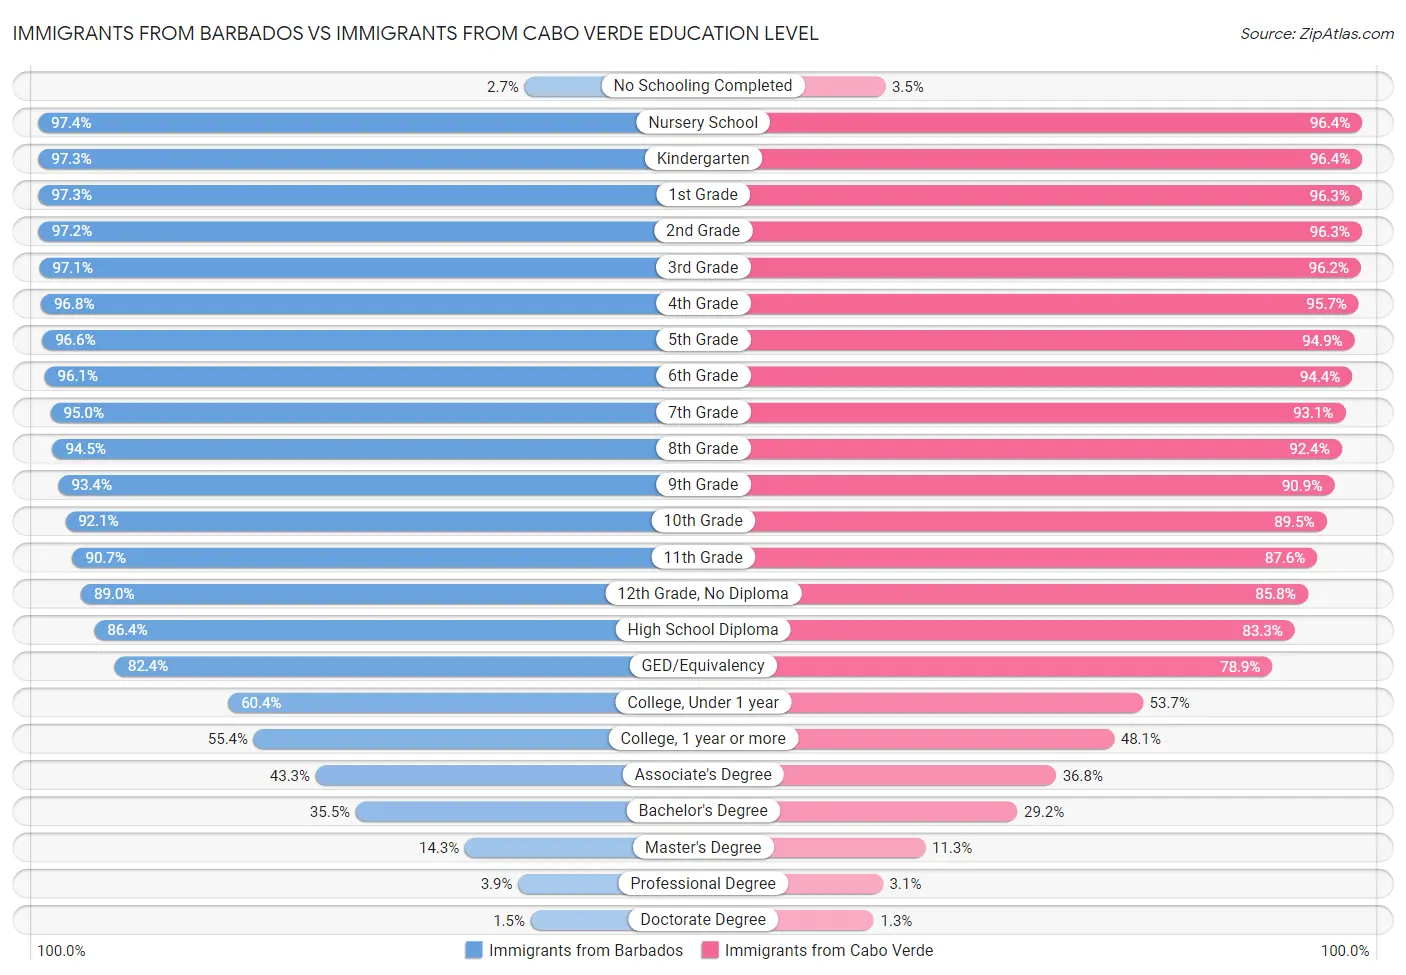 Immigrants from Barbados vs Immigrants from Cabo Verde Education Level